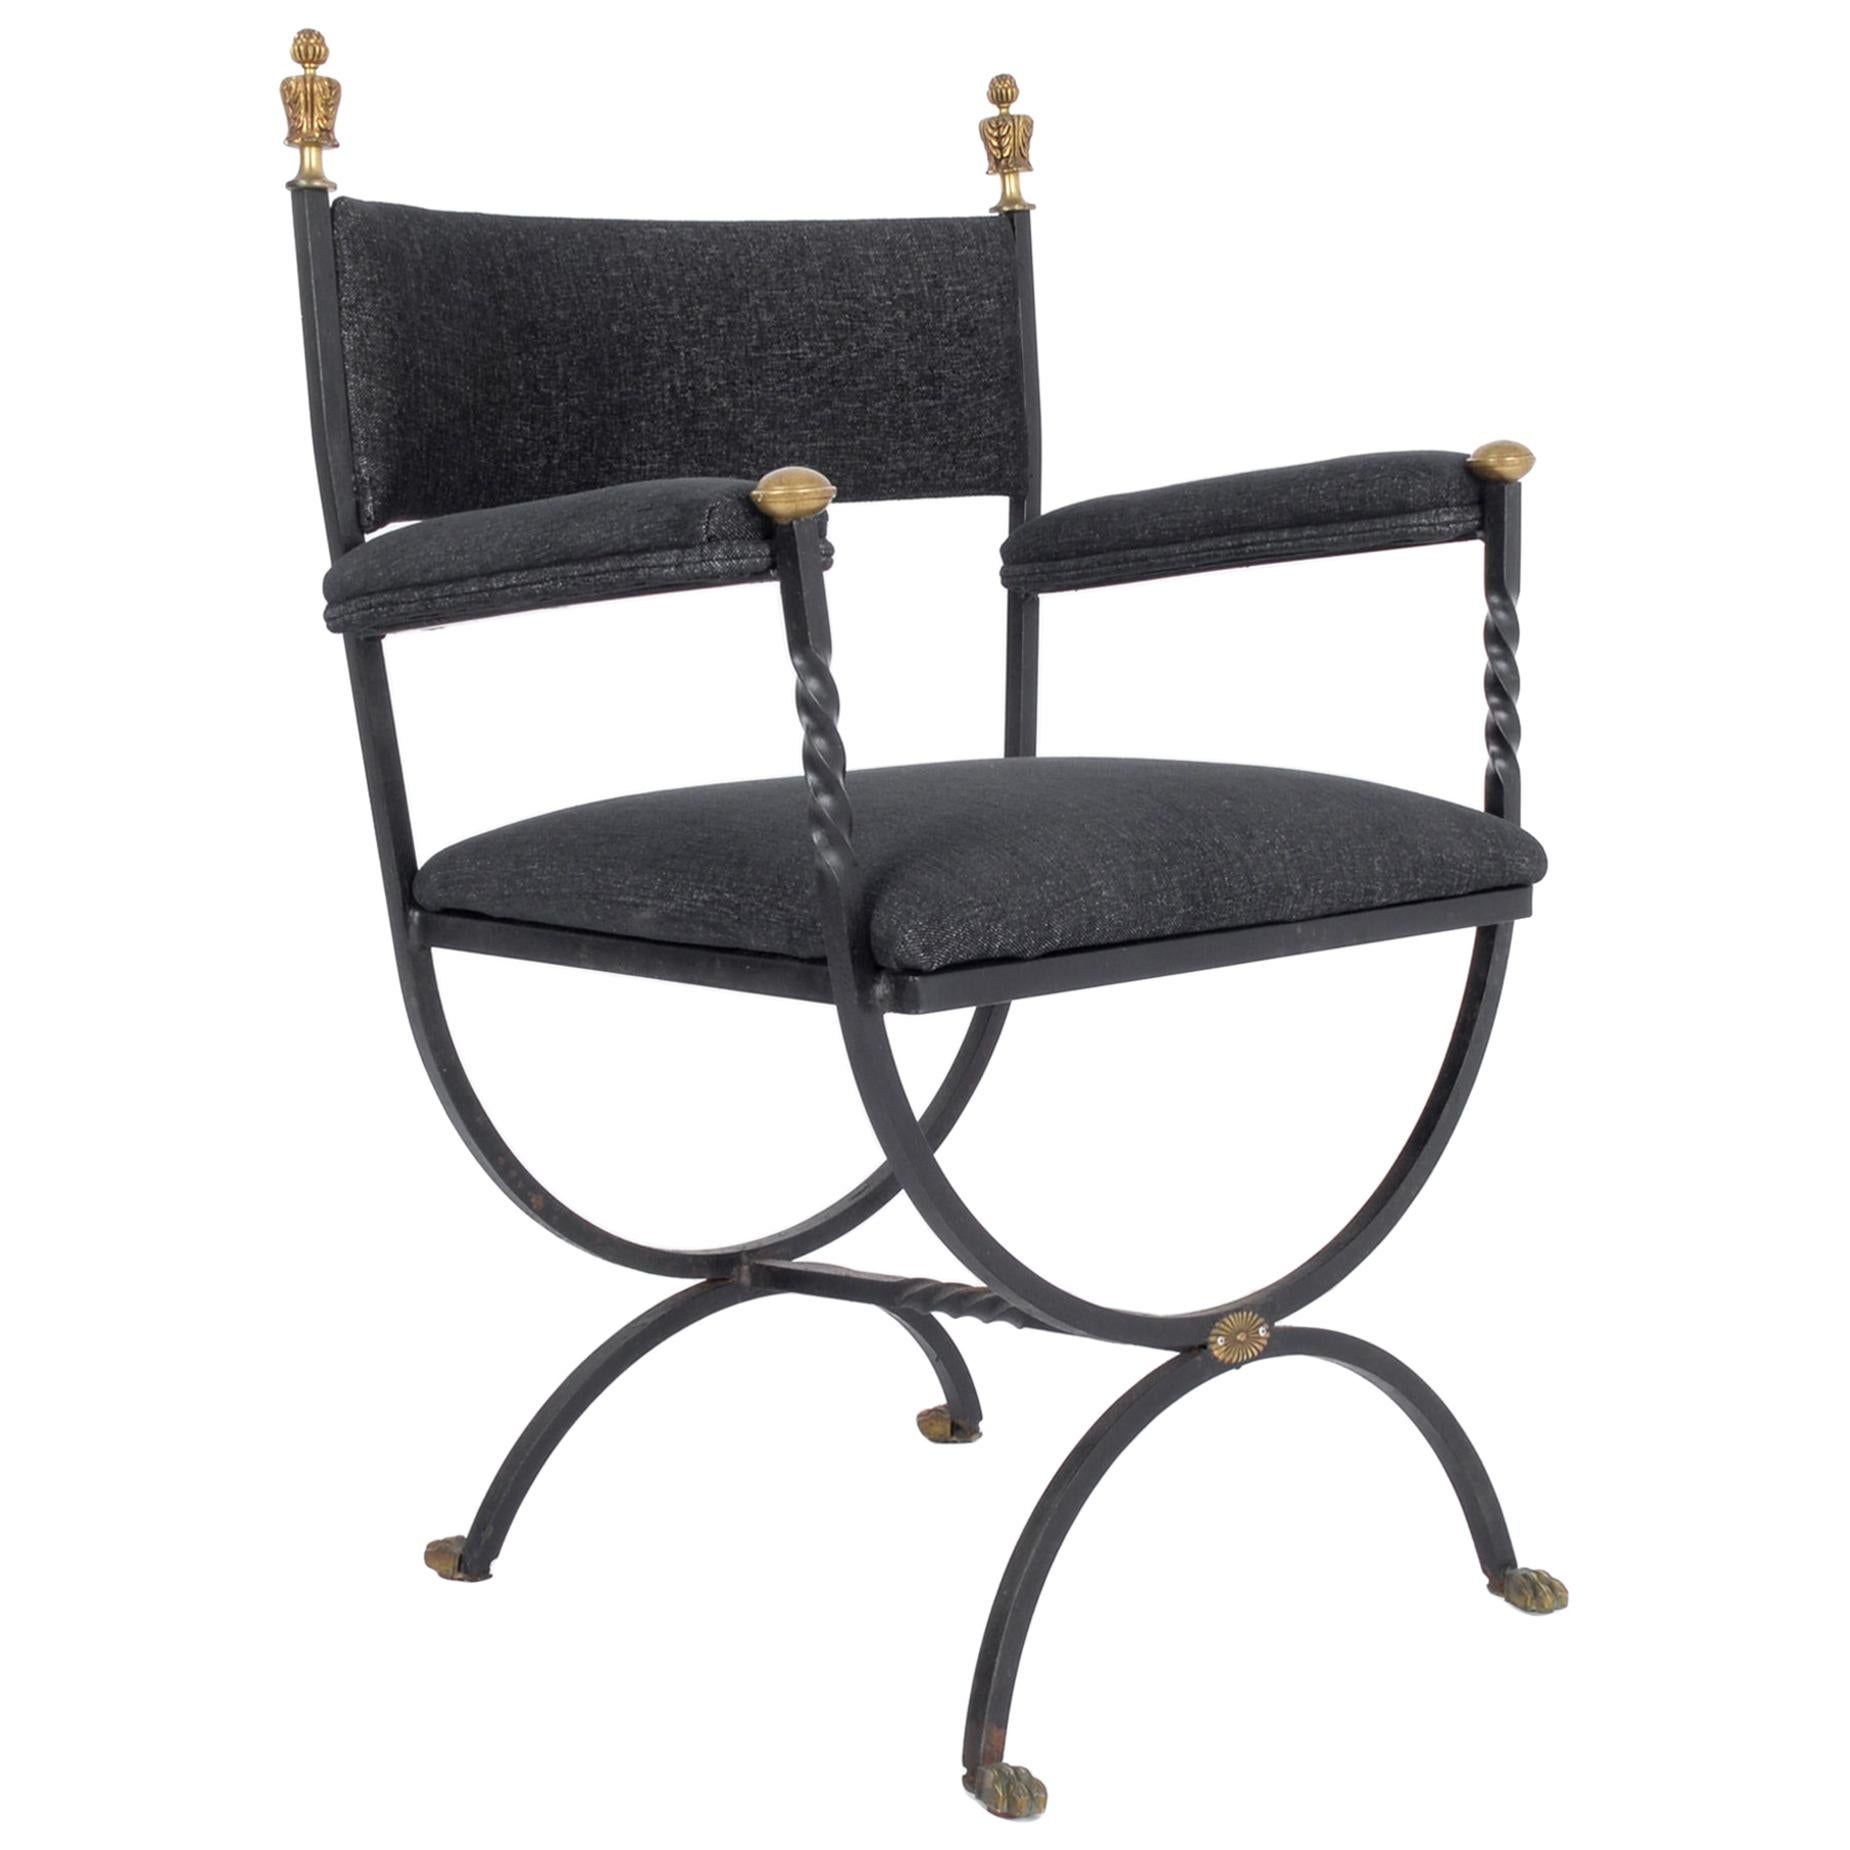 1960s Danish Wrought Iron Upholstered Side Chair